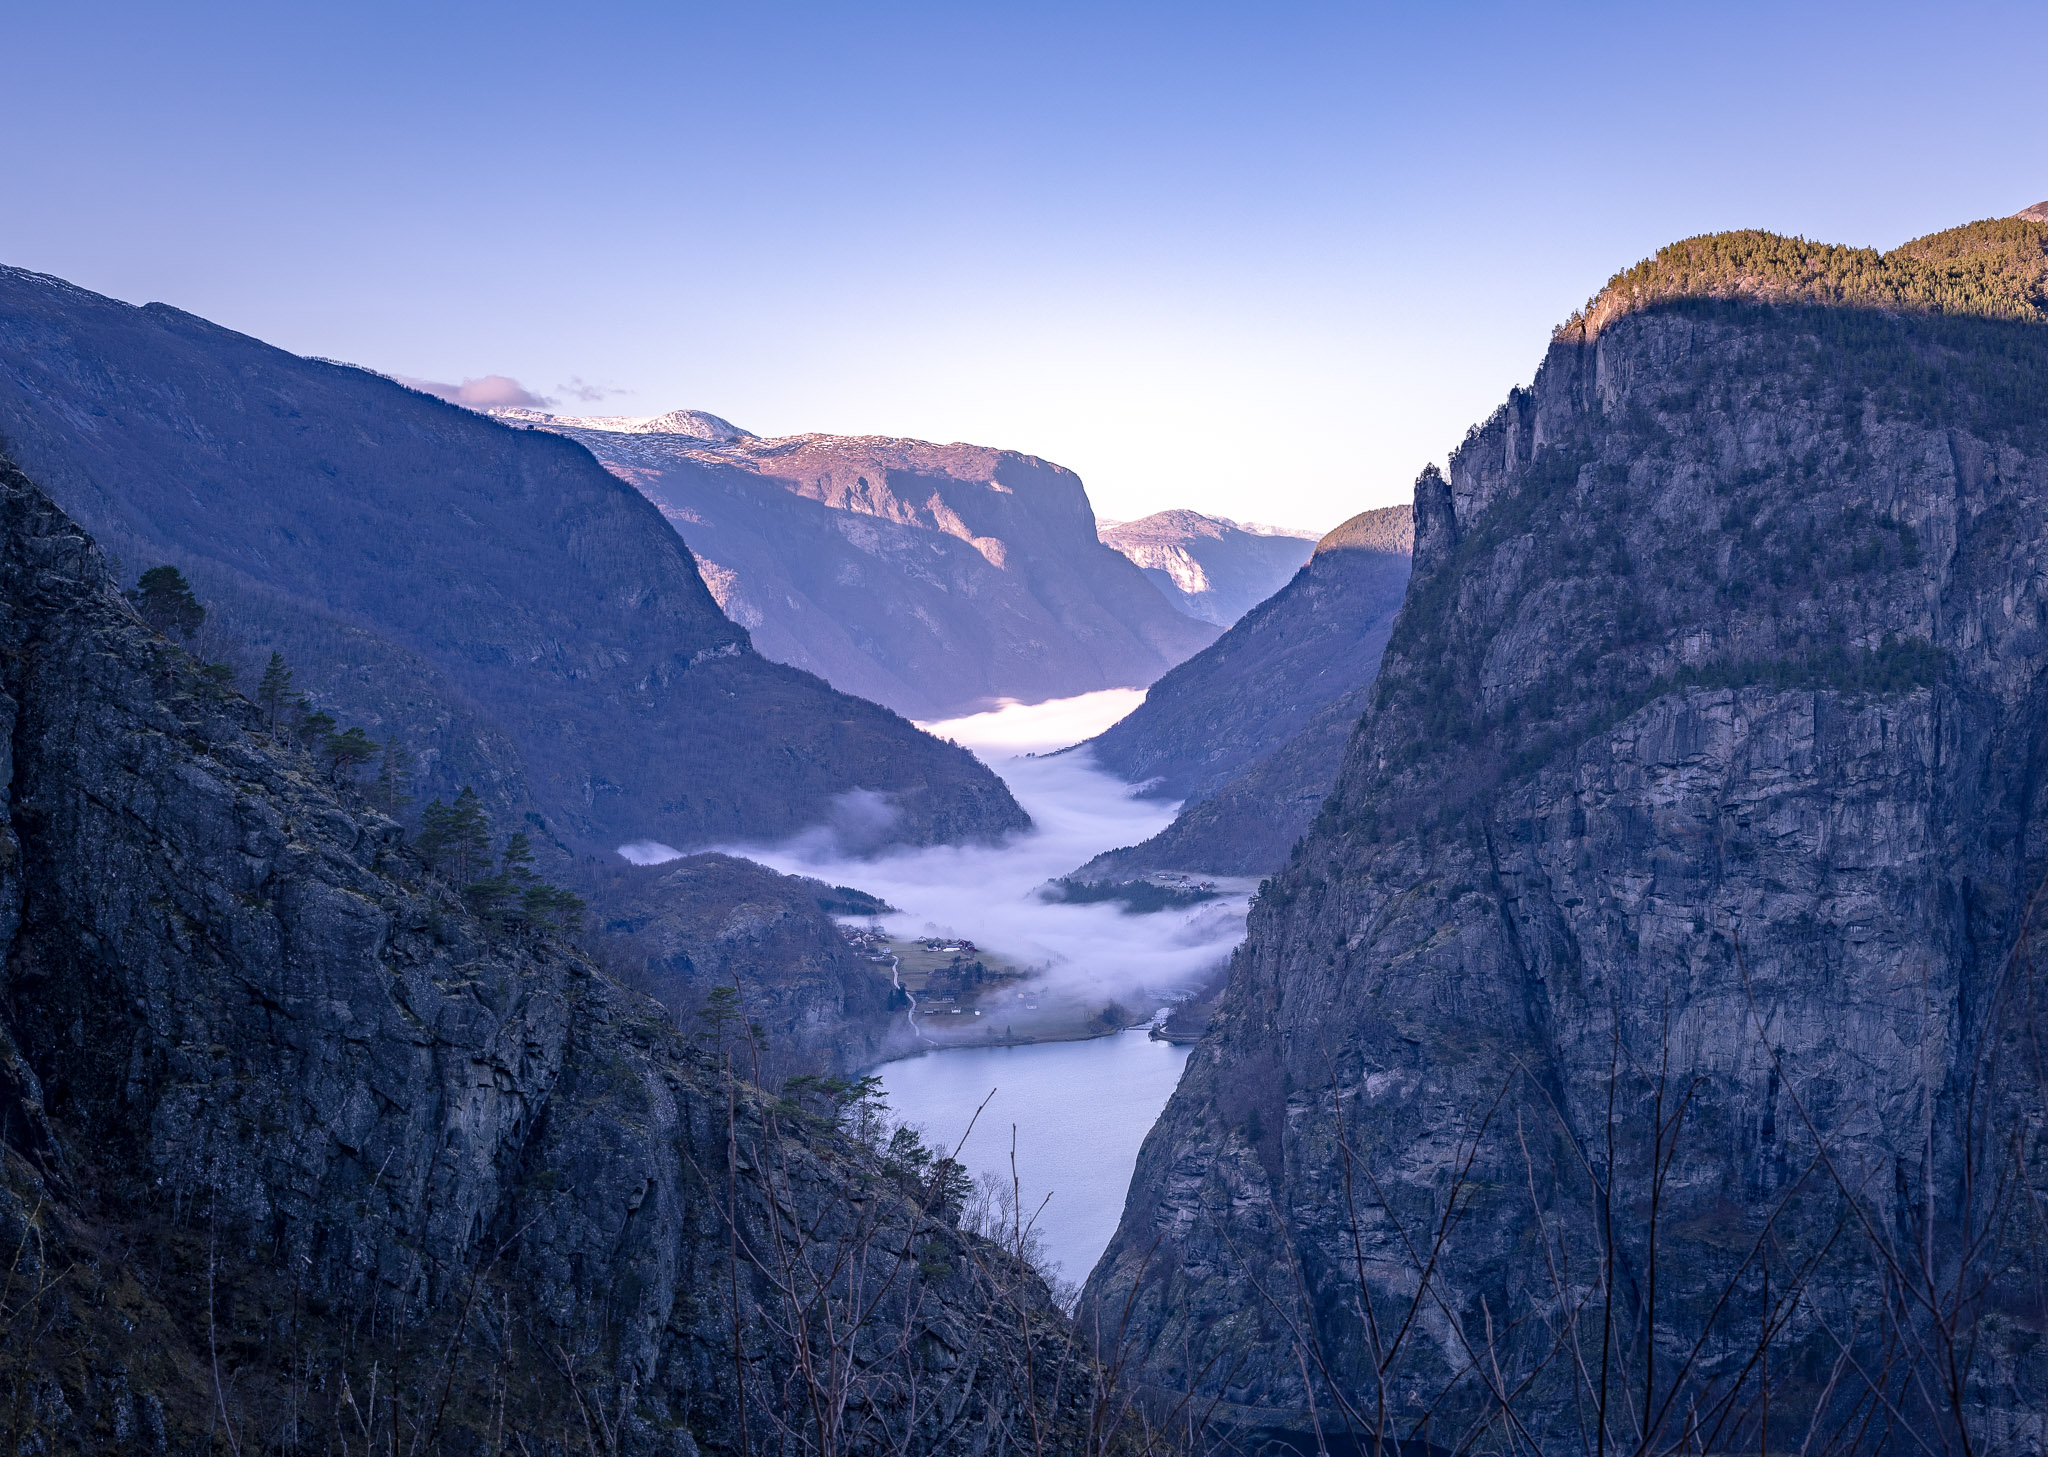 General 2048x1457 gorge mountains clear sky mist landscape Norway